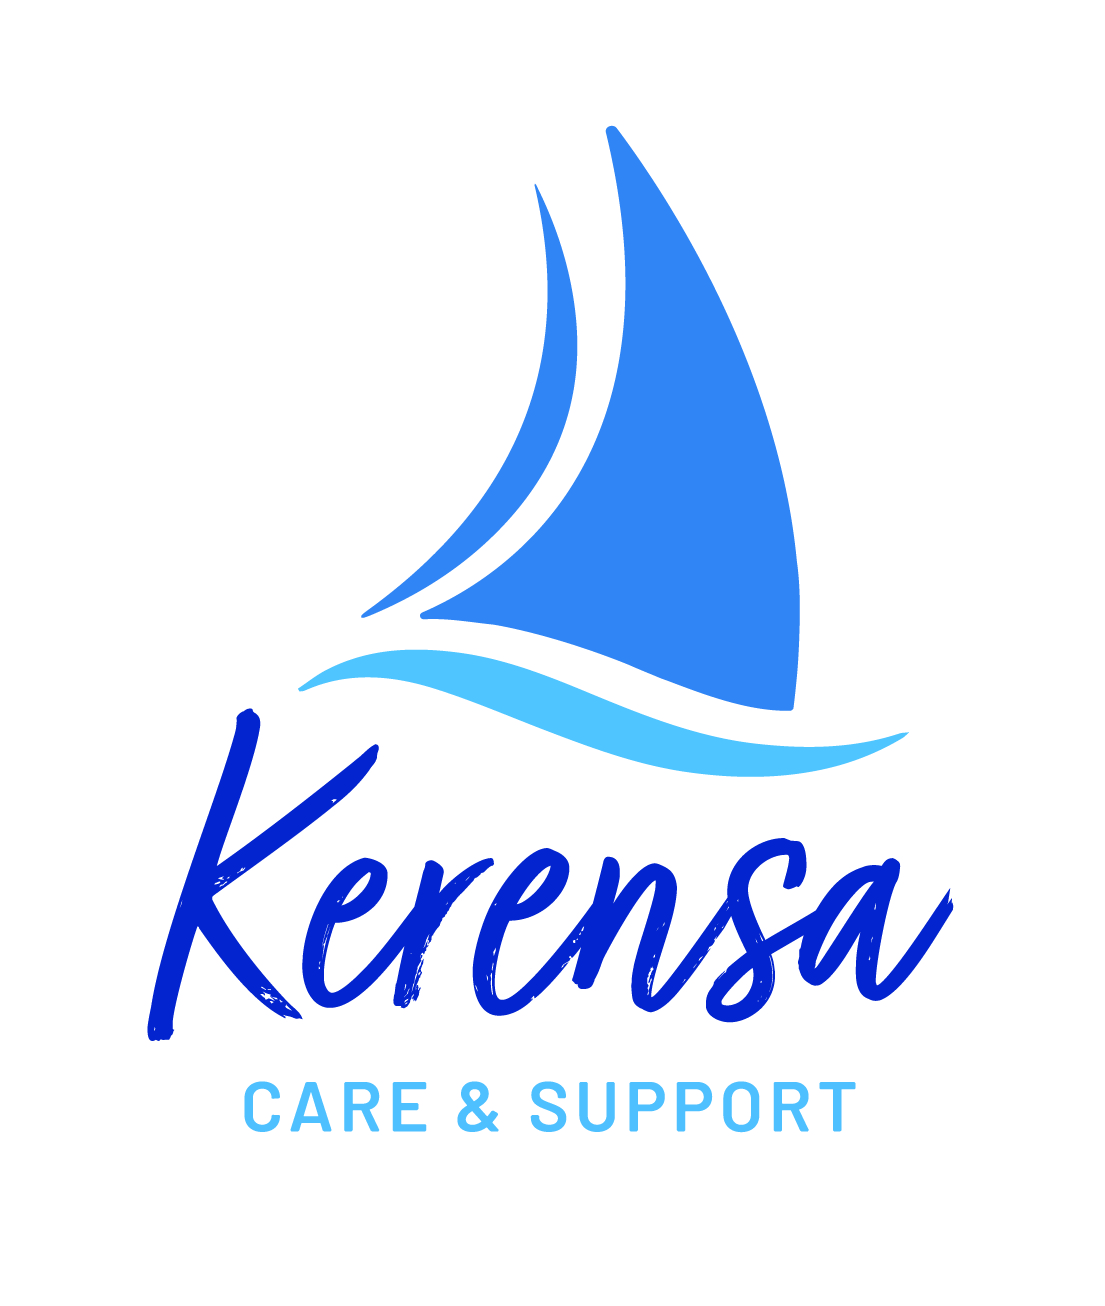 Kerensa Care and Support